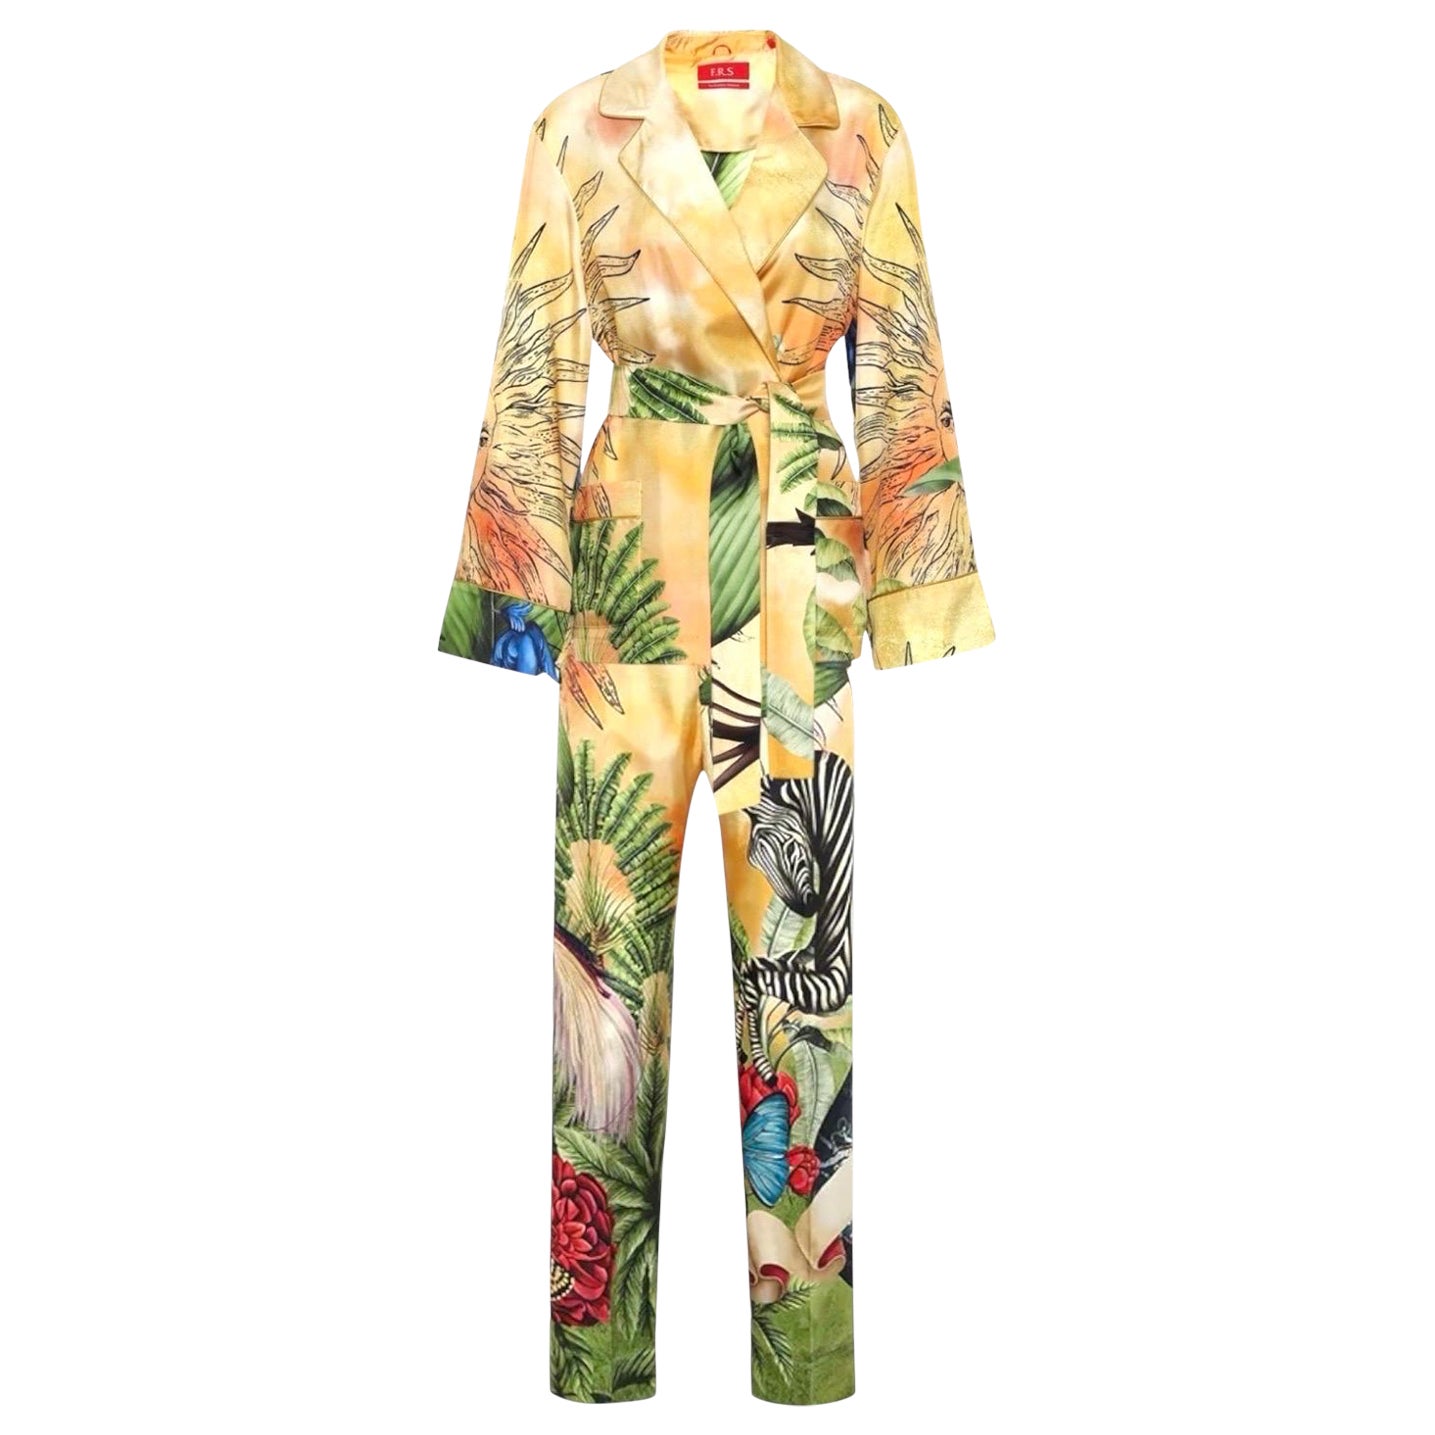 NEW F.R.S For Restless Sleepers FRS Jungle Animal Zebra Birds Pants Suit M For Sale